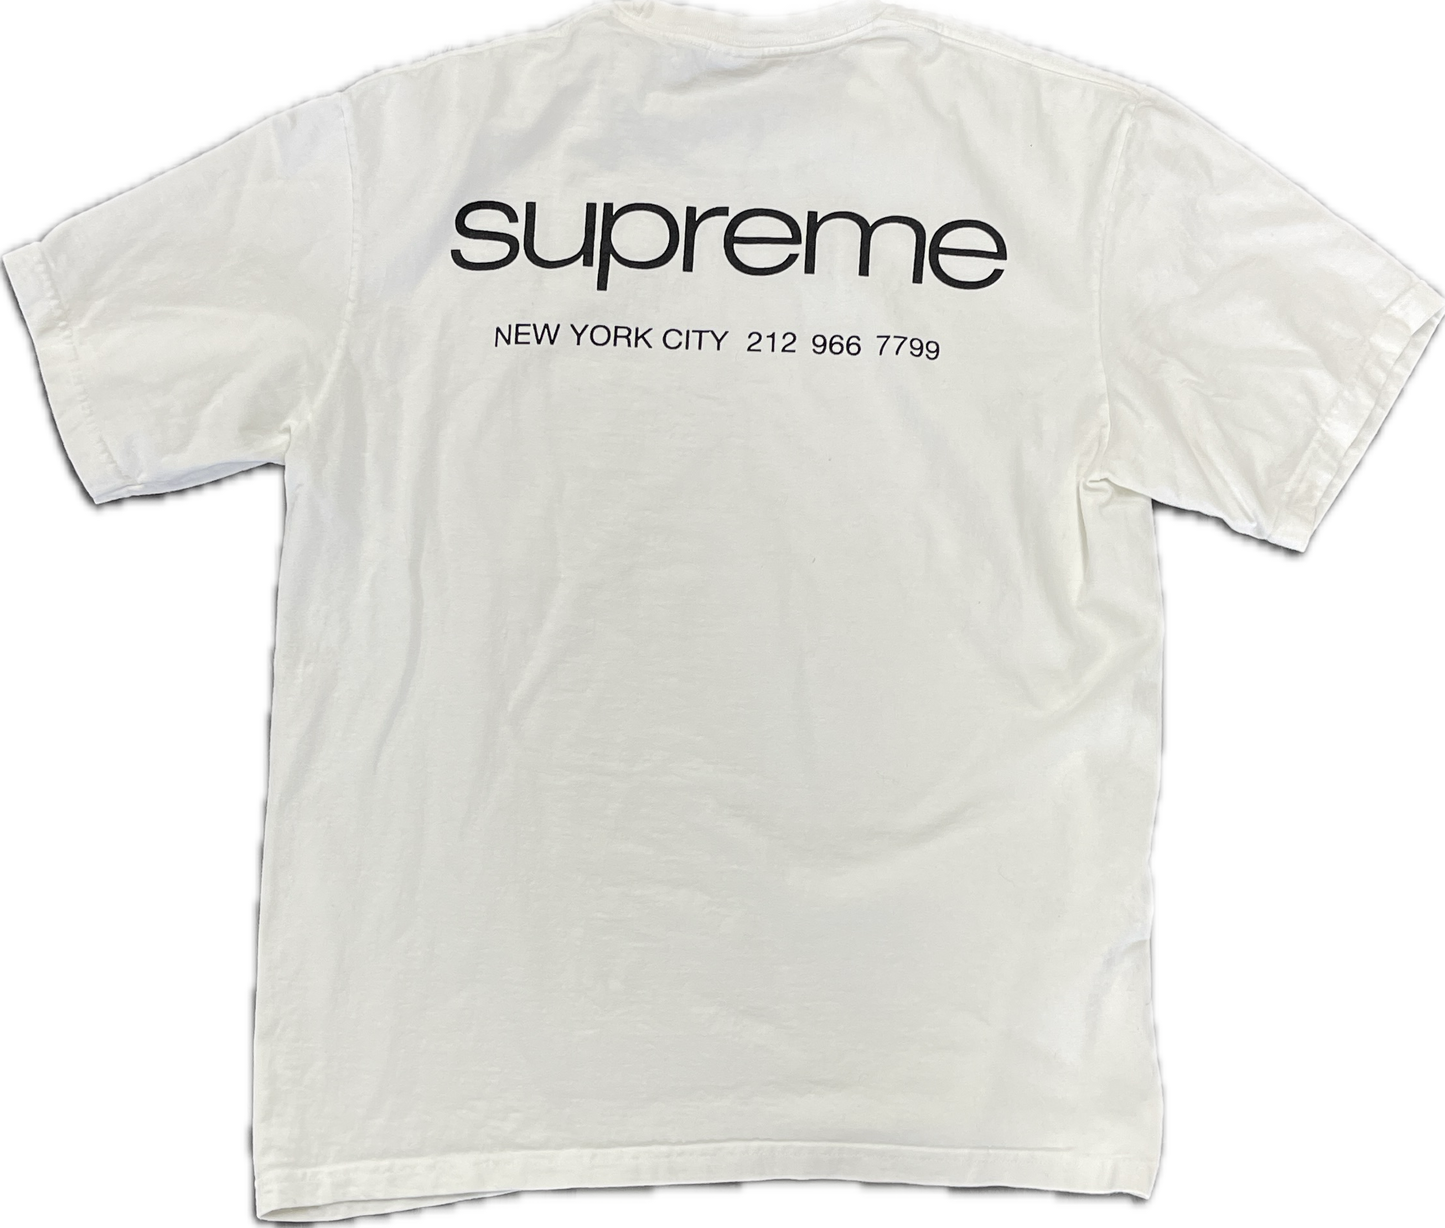 Supreme Phone Number T-shirt (USED)